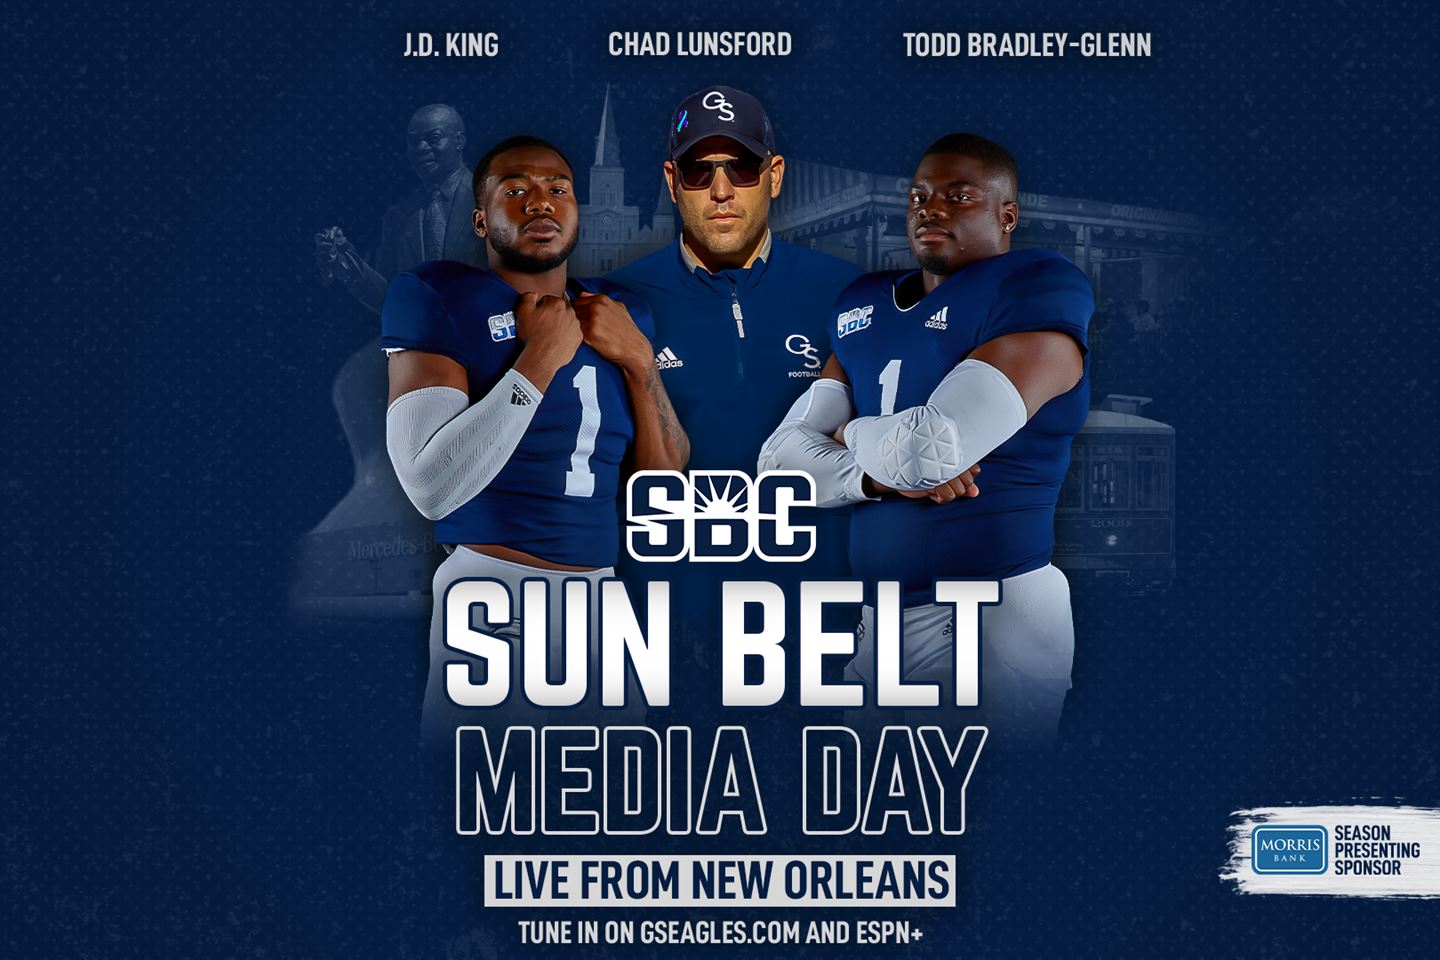 Georgia Southern football student-athletes J.D. King and Todd Bradley-Glenn will accompany head coach Chad Lunsford to the 2021 Sun Belt Media Day.